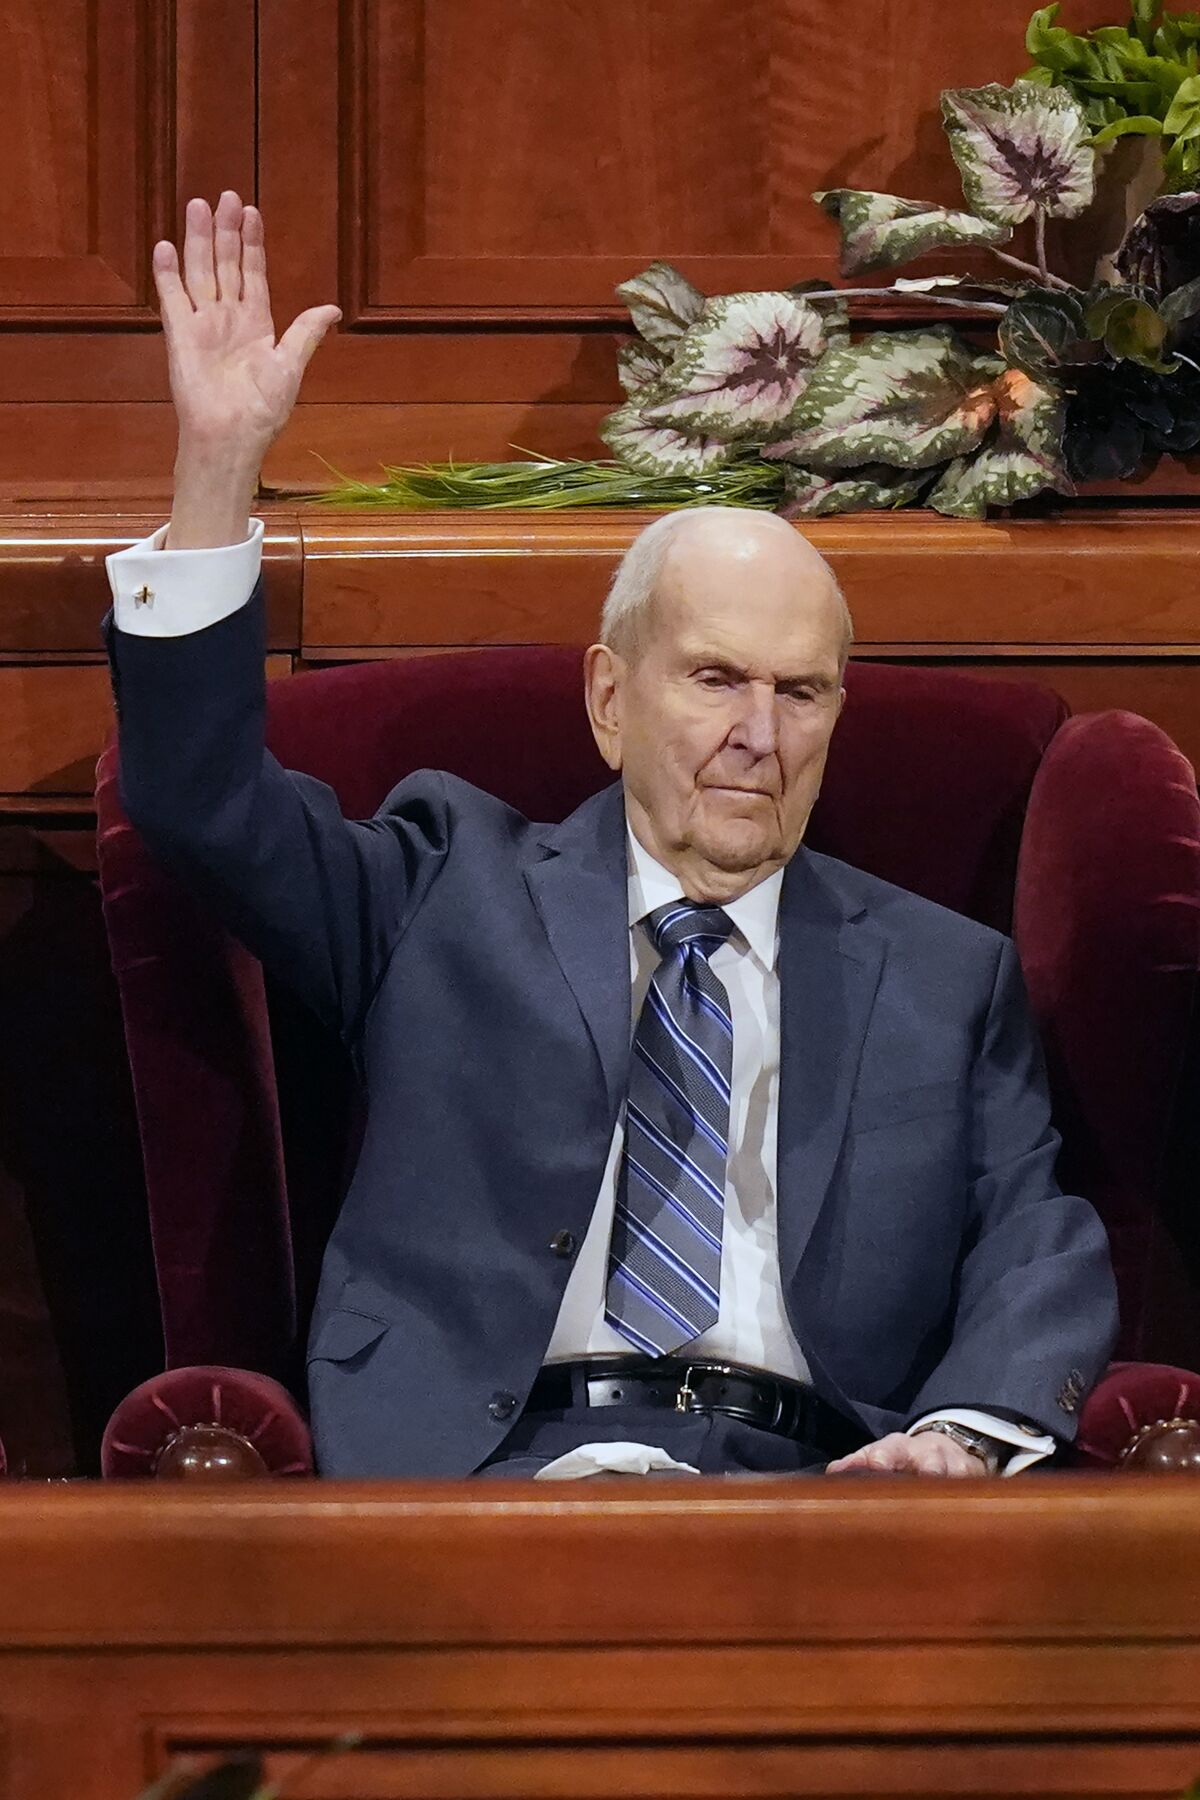 FILE - President Russell M. Nelson raises his hand during a sustaining vote during The Church of Jesus Christ of Latter-day Saints' twice-yearly conference Saturday, April 2, 2022, in Salt Lake City. The president of the The Church of Jesus Christ of Latter-day Saints became the faith's oldest leader in history on Tuesday, April 12, 2022 at 97 years, seven months and six days. (AP Photo/Rick Bowmer, File)